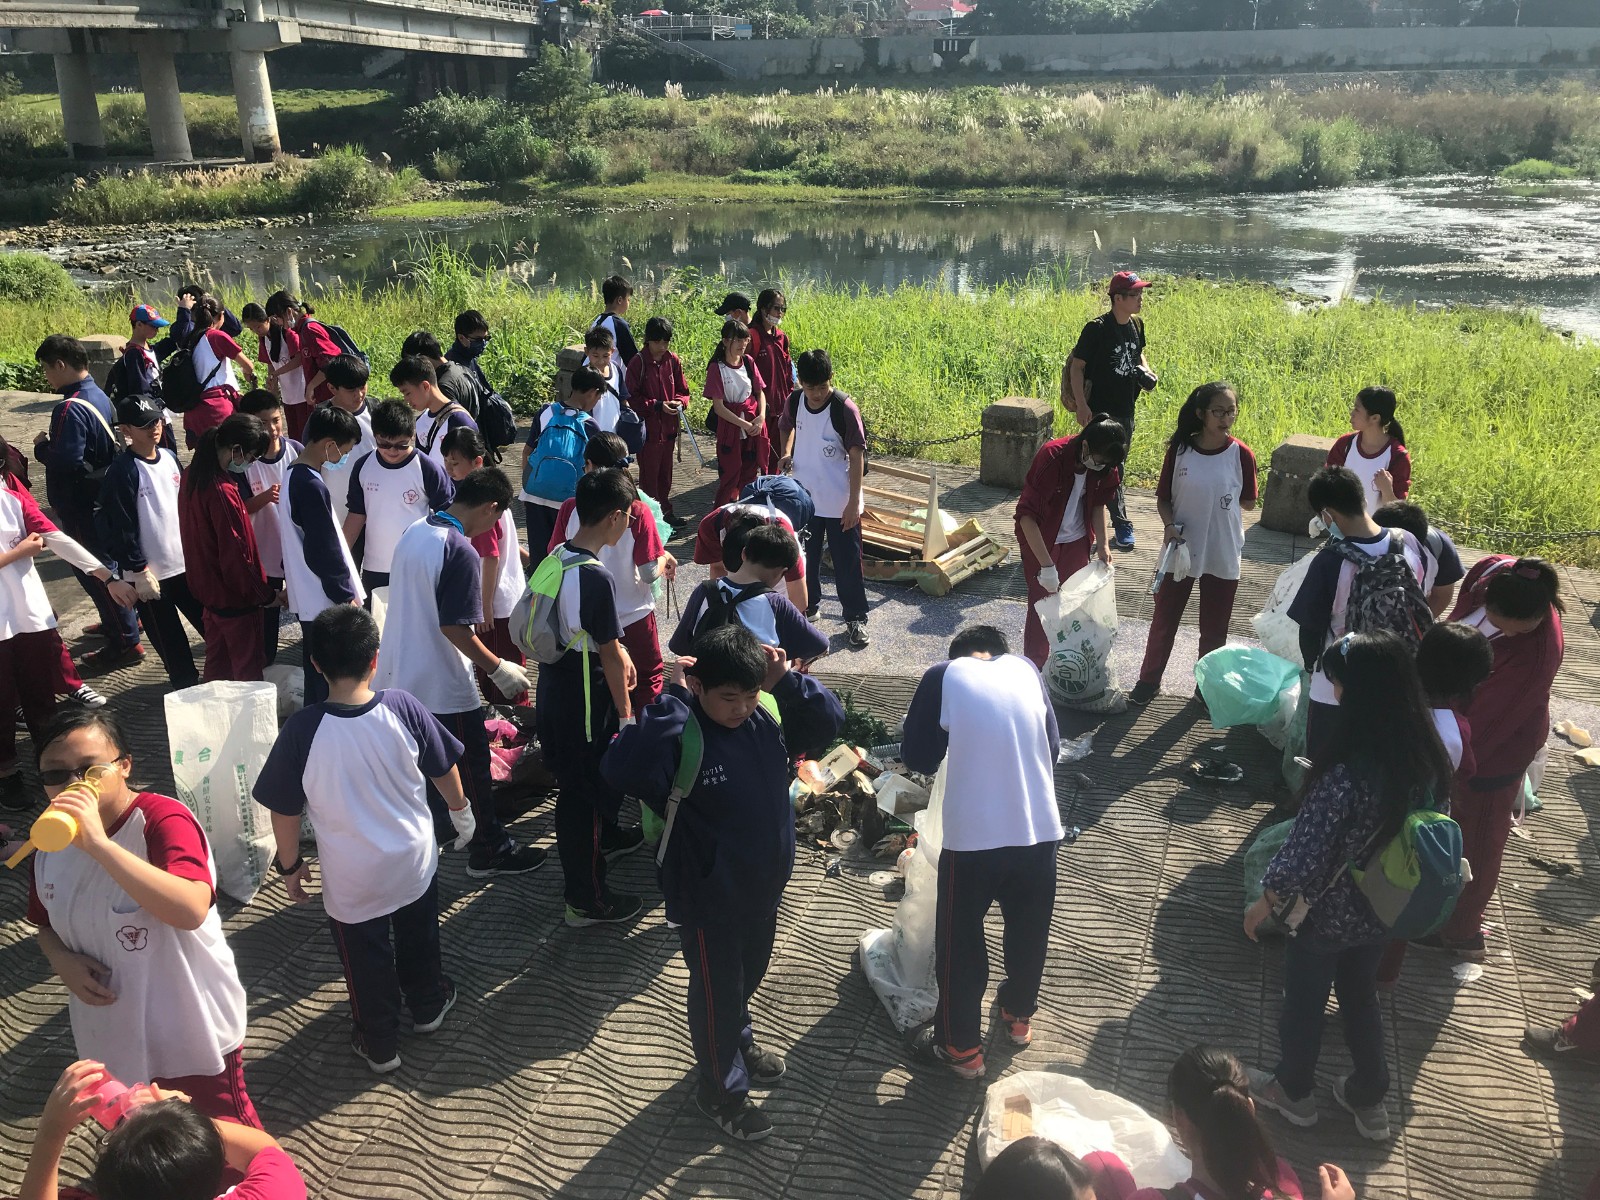 Special Appreciation｜Sanxia Junior High School  Weather: Sunny  Number of people: 84  Hours: 1hrs  Achievements: 14 bags of garbage, a tattered sofa  | Taipei Cultural experience | CAN Culture